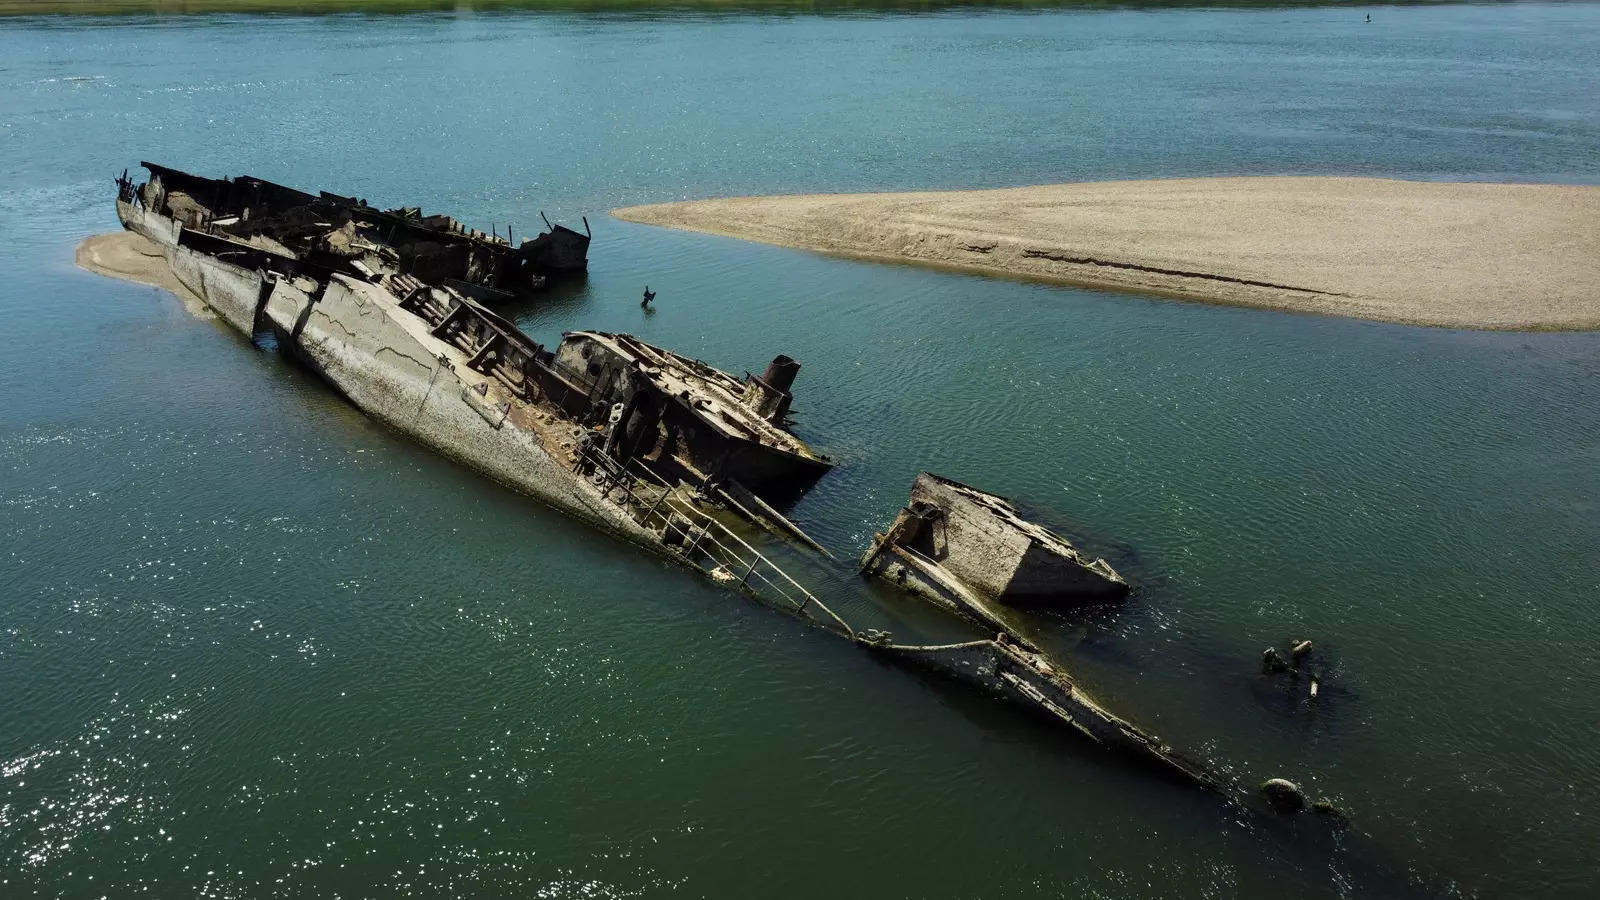 Wreckage of a World War Two German warship is seen in the Danube in Prahovo, Serbia, August 18, 2022. (Reuters)